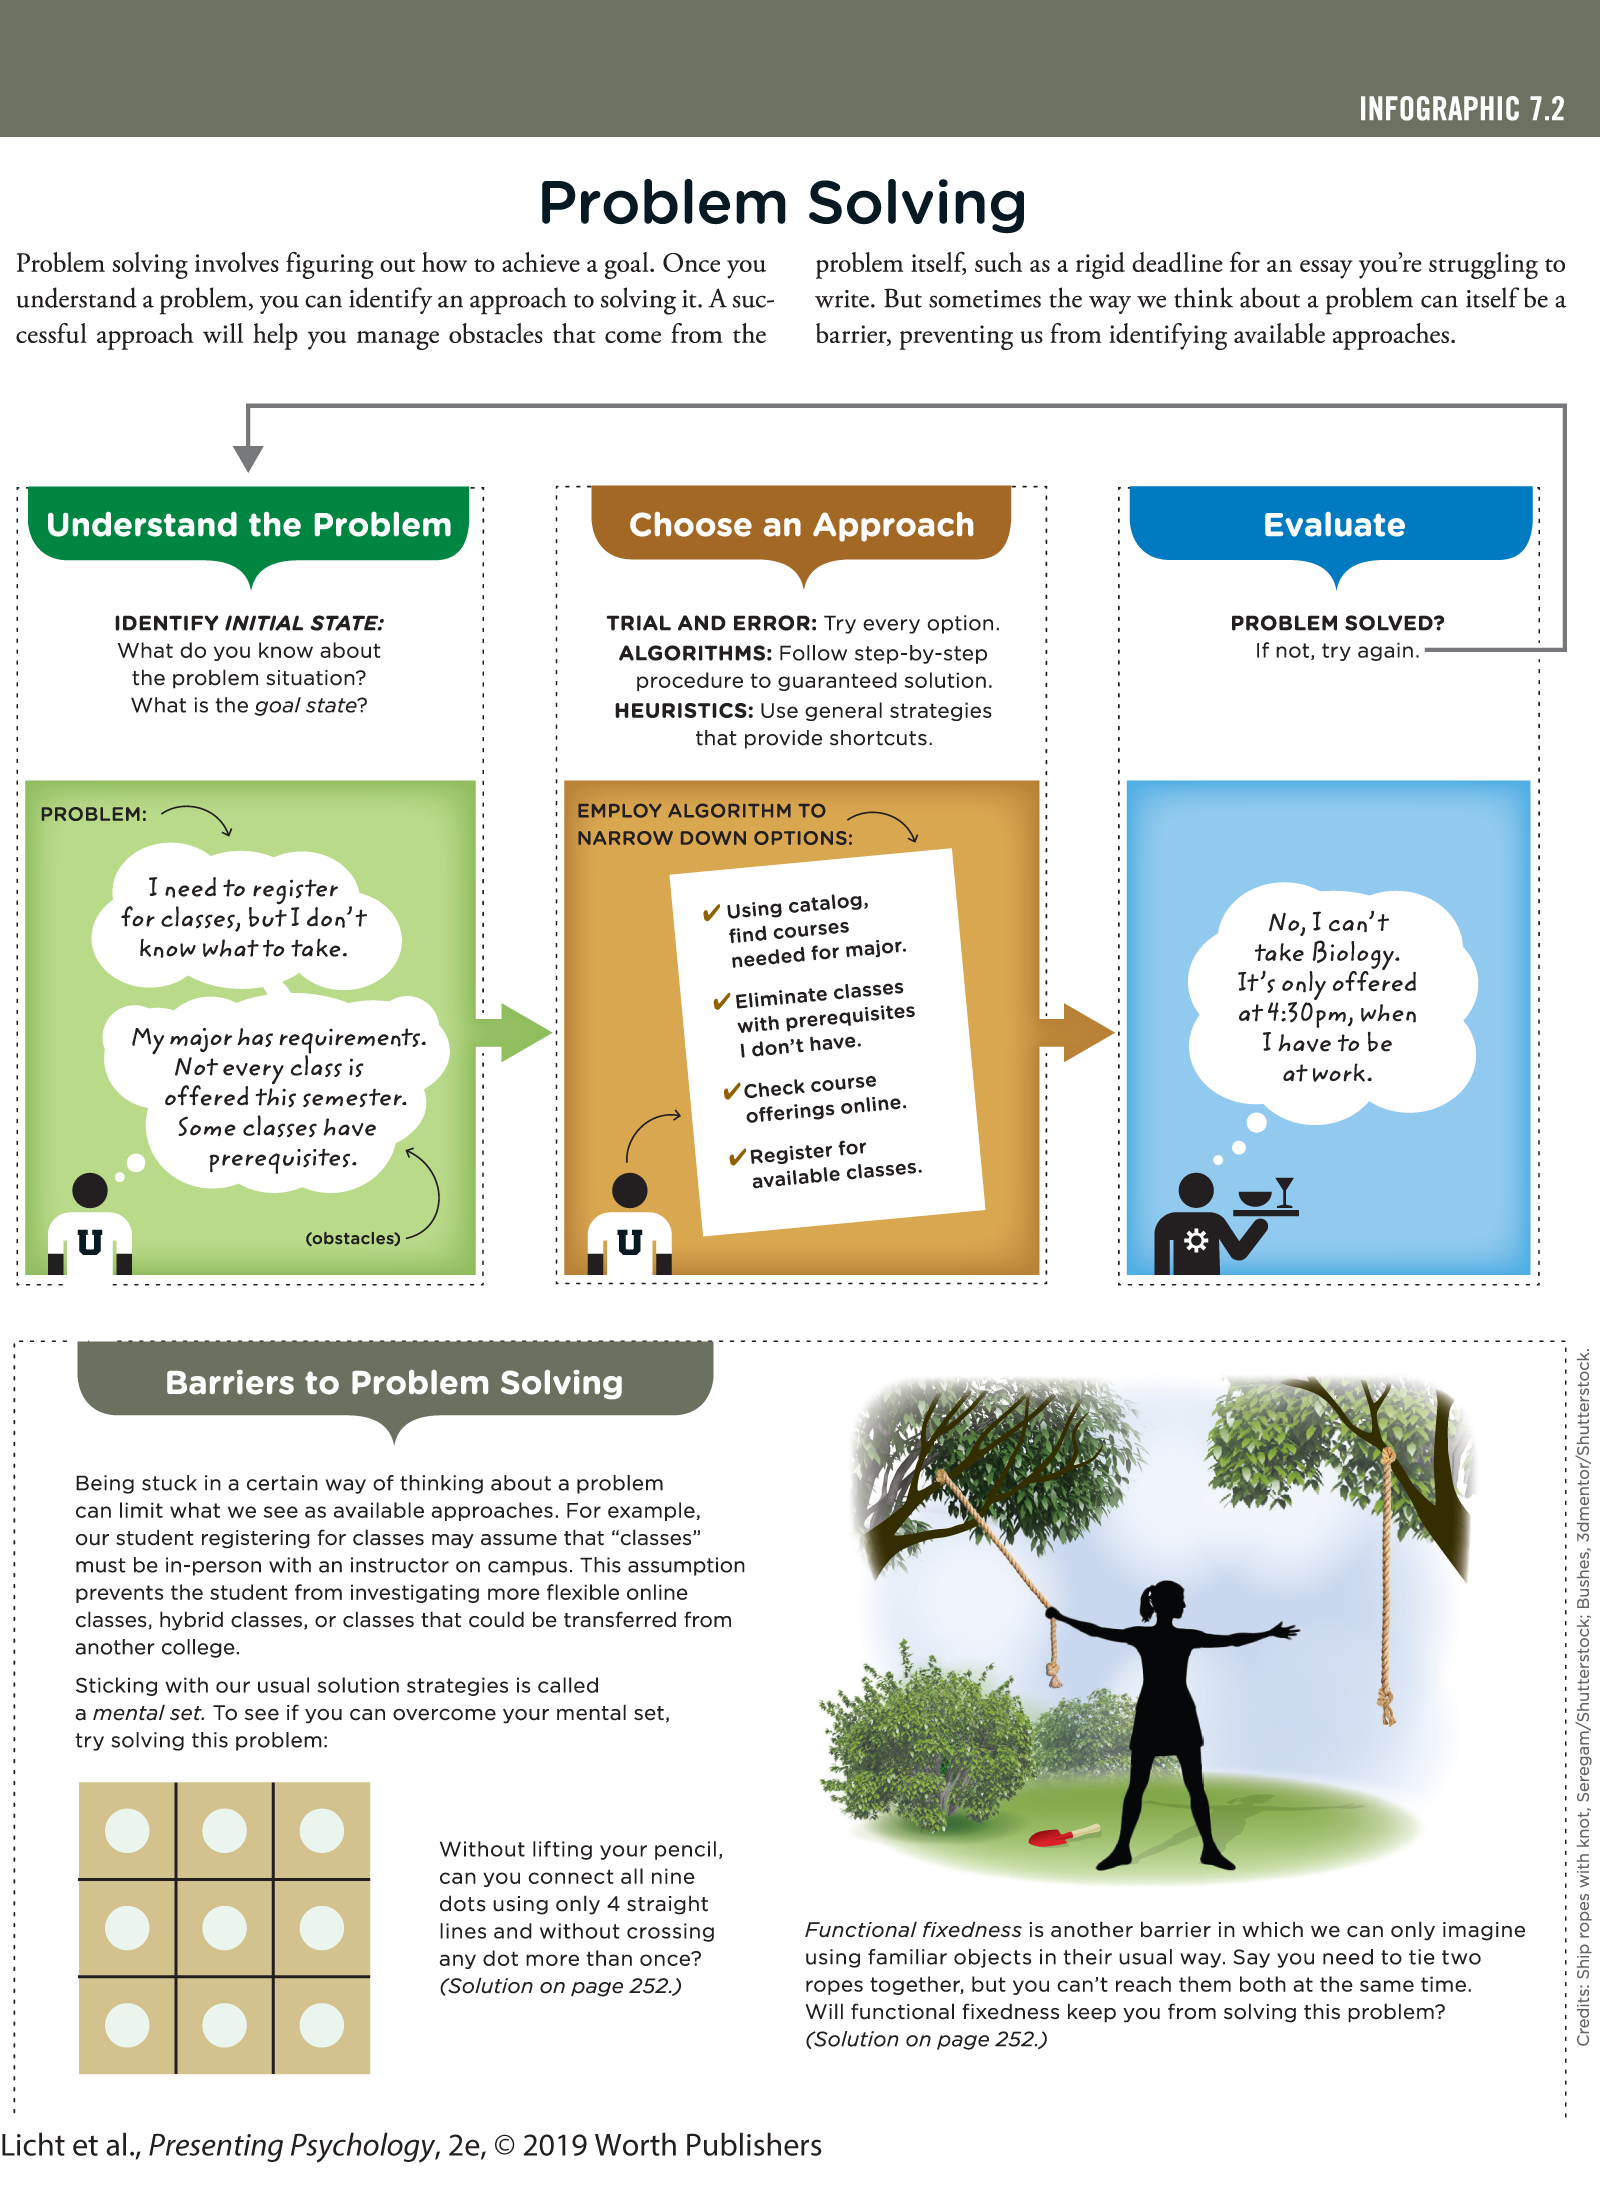 An infographic titled, Problem Solving shows how problems can be approached and solved. You can read full description from the link below